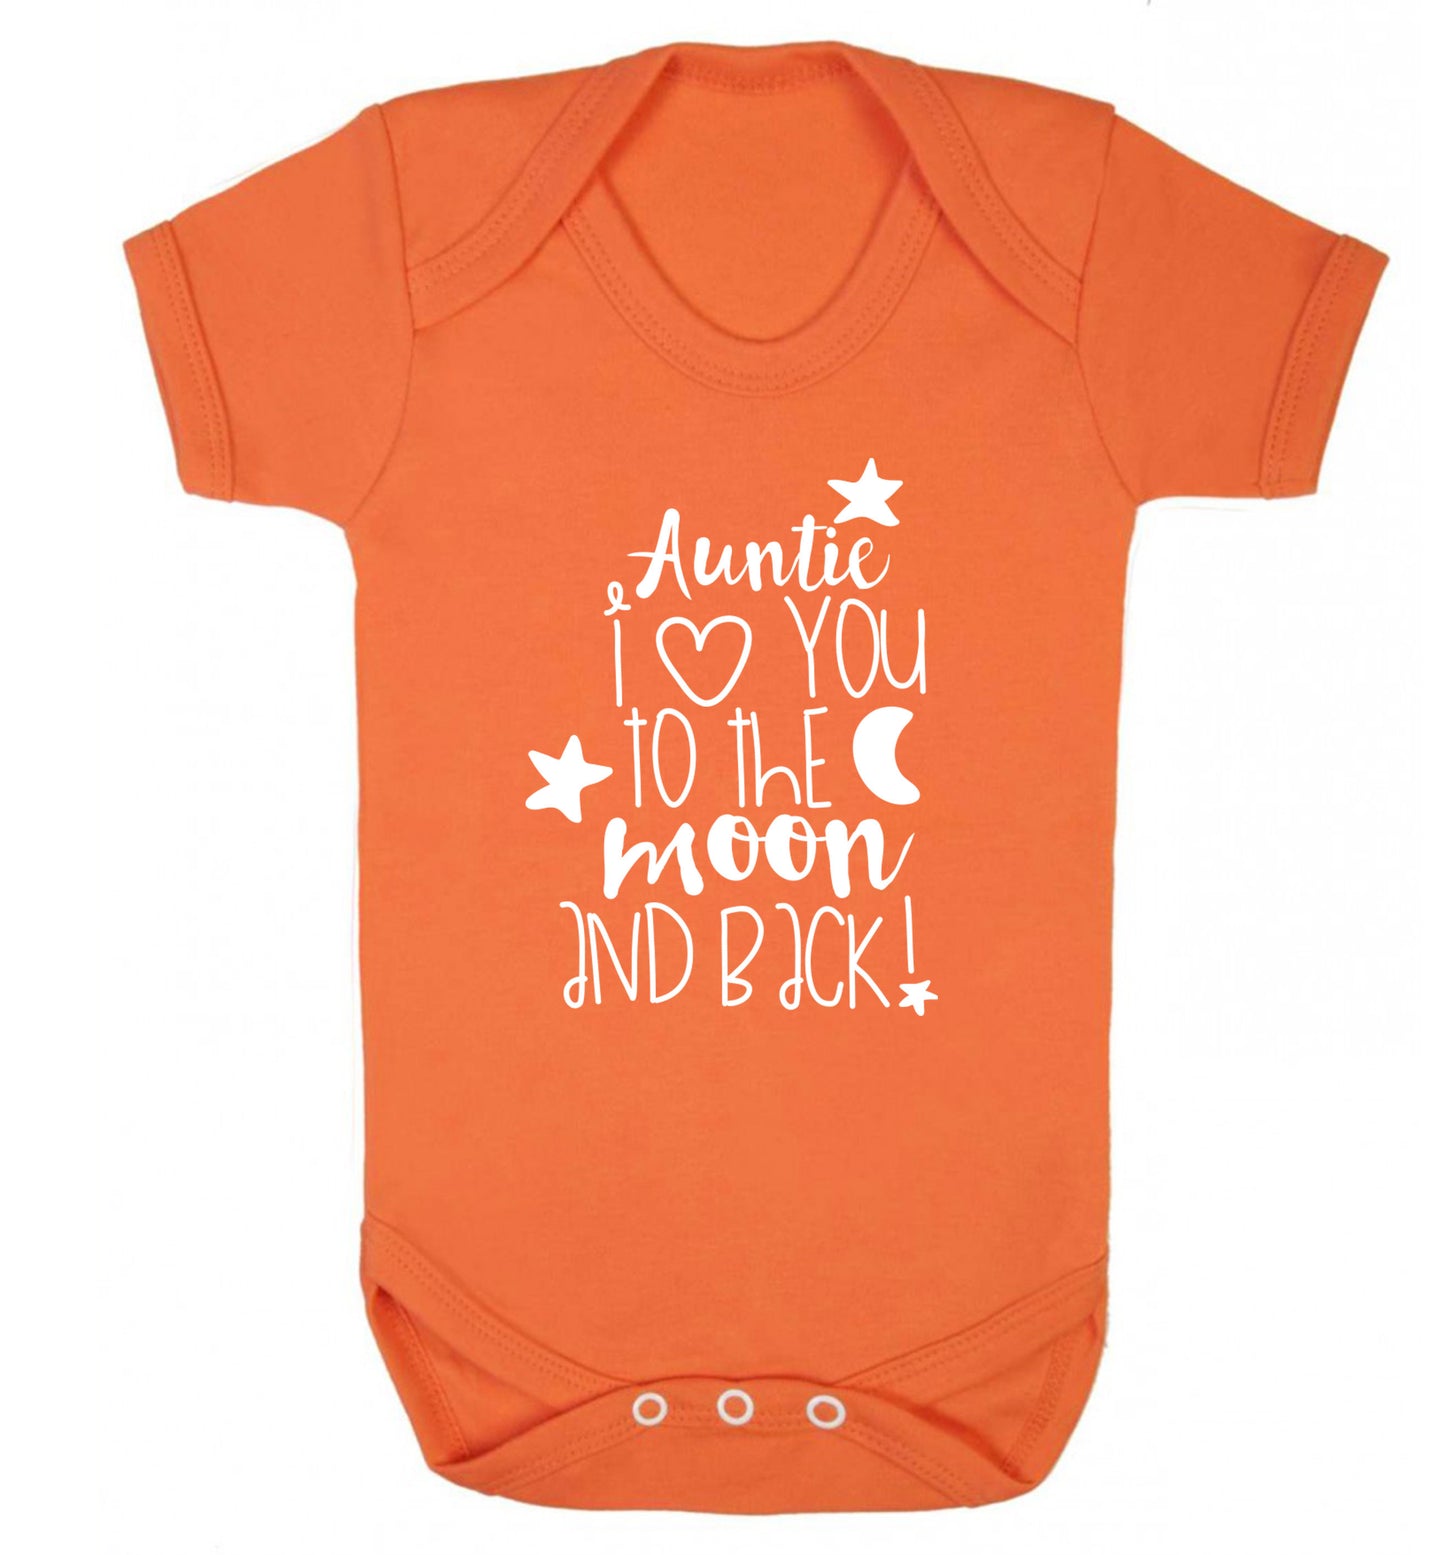 Auntie I love you to the moon and back Baby Vest orange 18-24 months